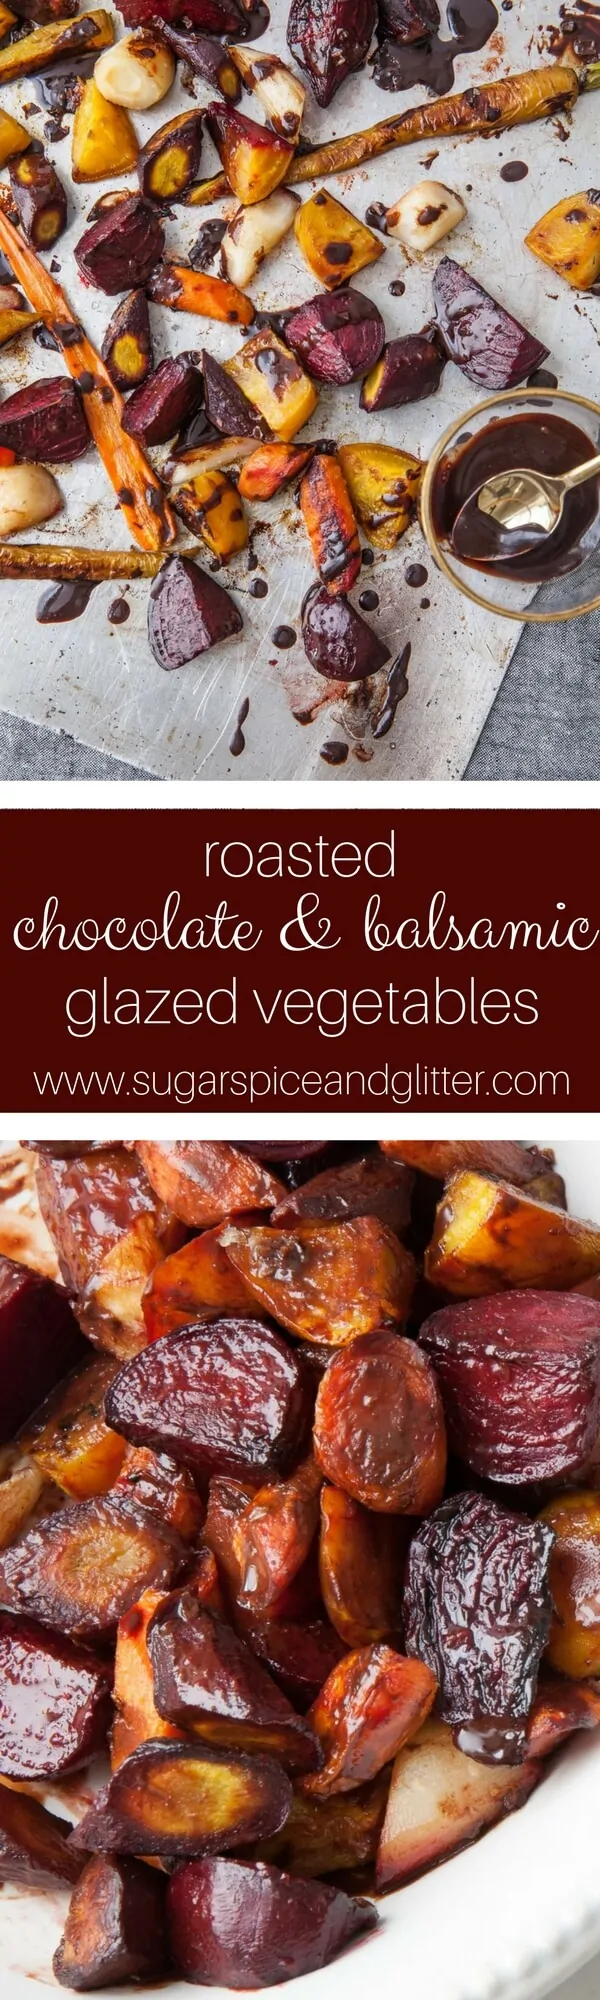 An easy roasted vegetable side dish, this Chocolate Balsamic vegetable dish is such a fun and unusual recipe for a Willy Wonka movie night or a potluck recipe that will get everyone talking